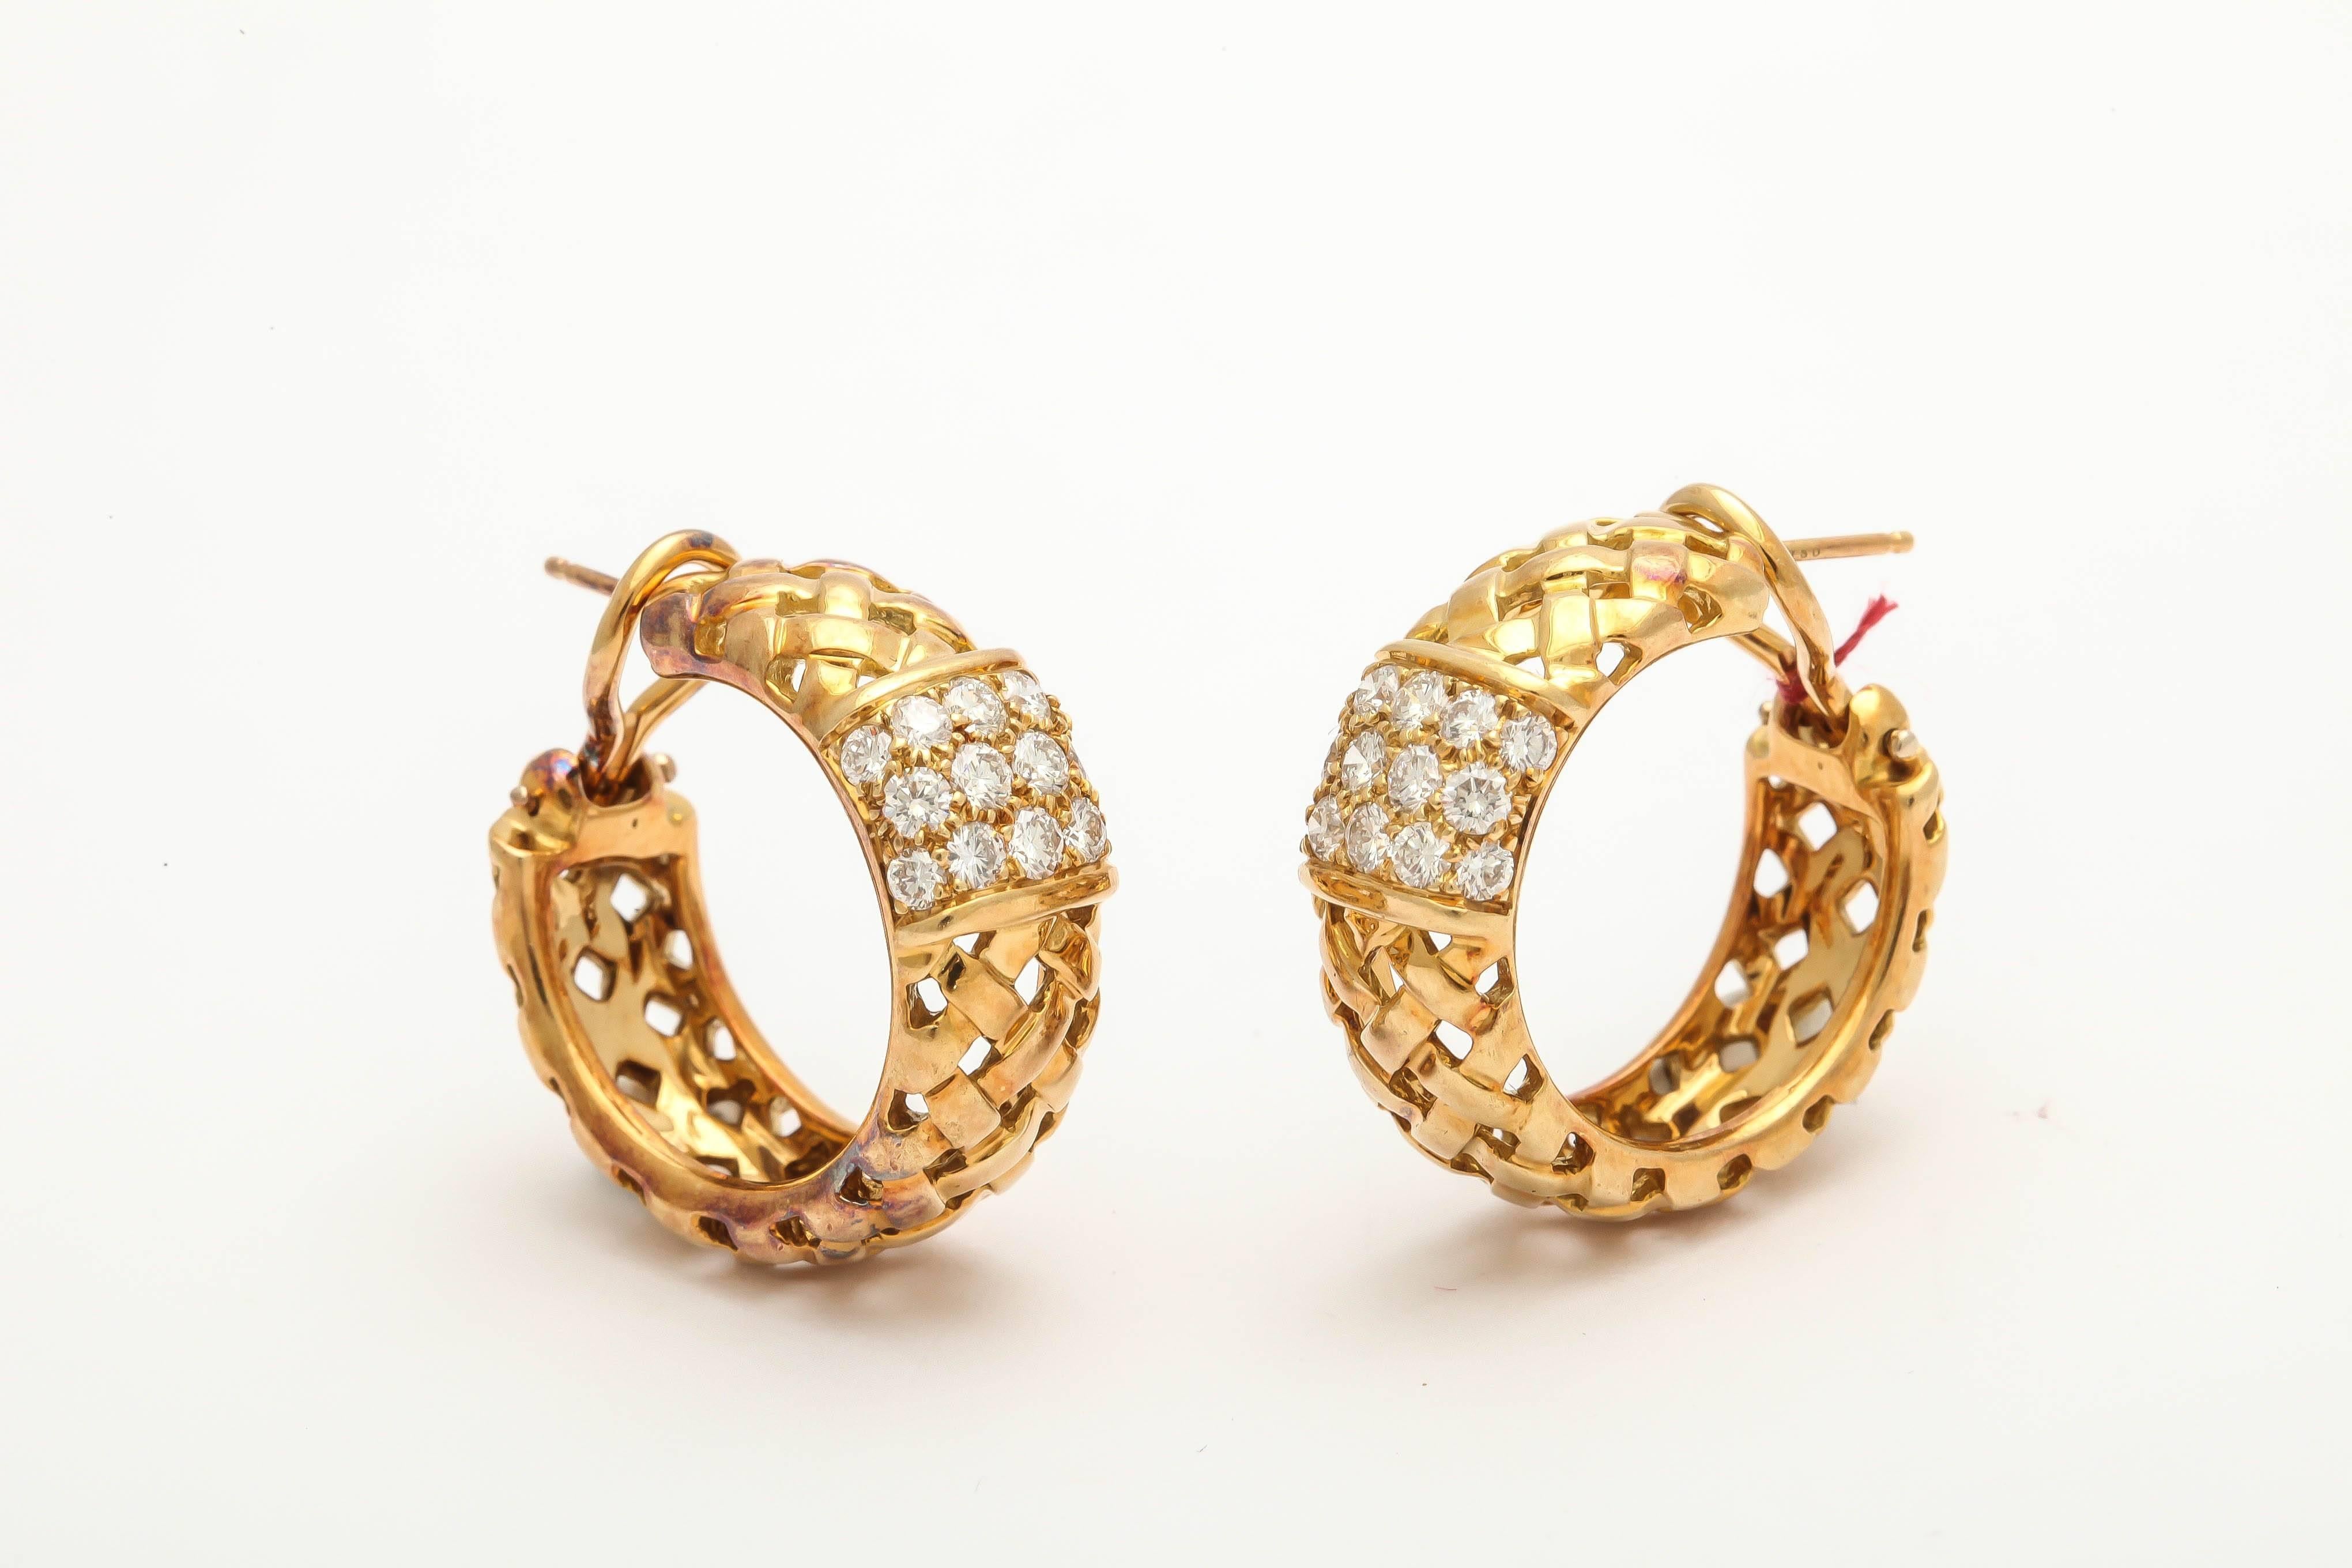 18kt high polish gold earrings comprising of a texturized basket- weave craftsmanship and centering numerous high quality full cut diamonds f-g color VVs Quality weighing approximately 1.25cts total weight. These Classically Designed Earrings Are